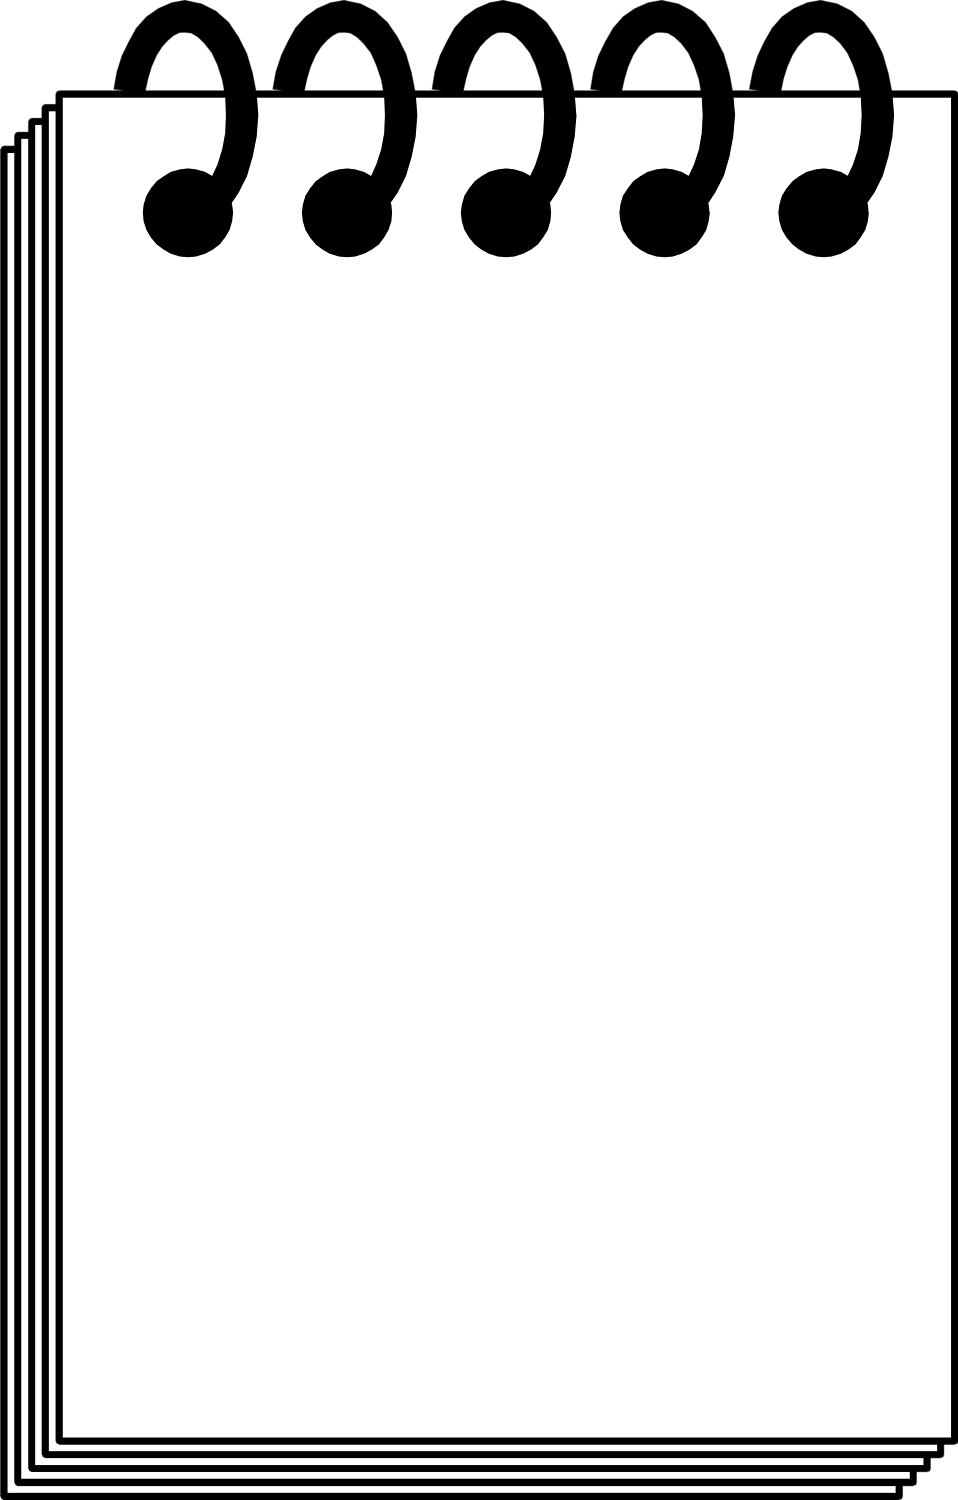 Pad   Free Stock Photo   Illustration Of A Blank Note Pad     7377